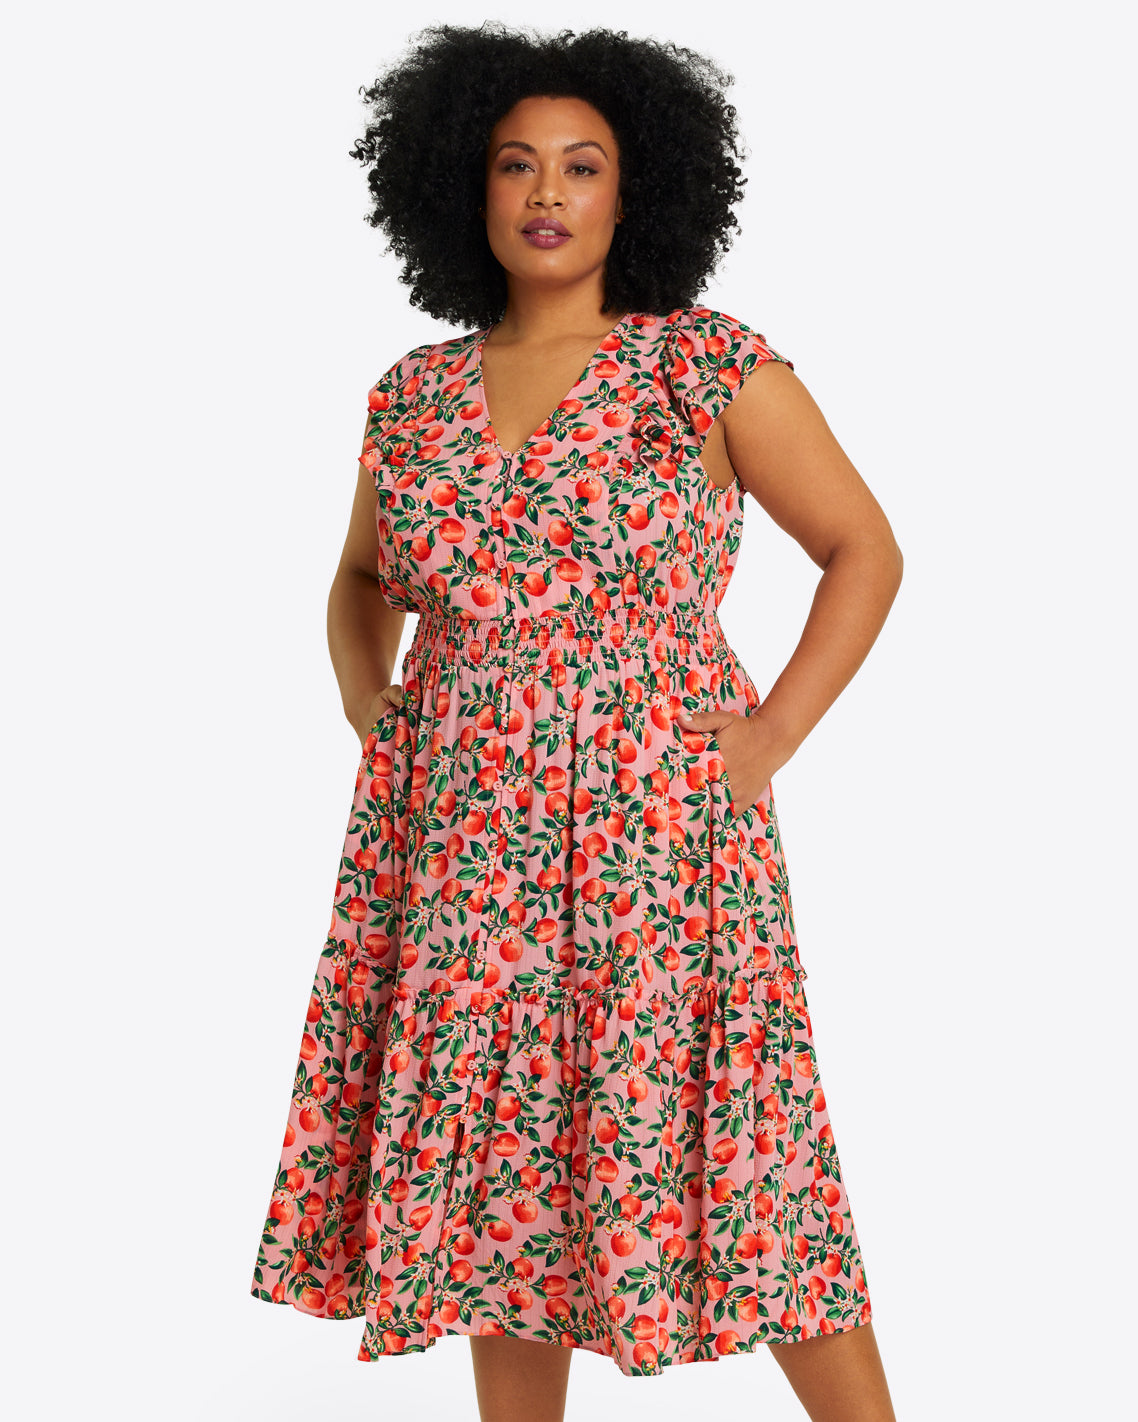 Marie Midi Dress in Apple Blossom Floral